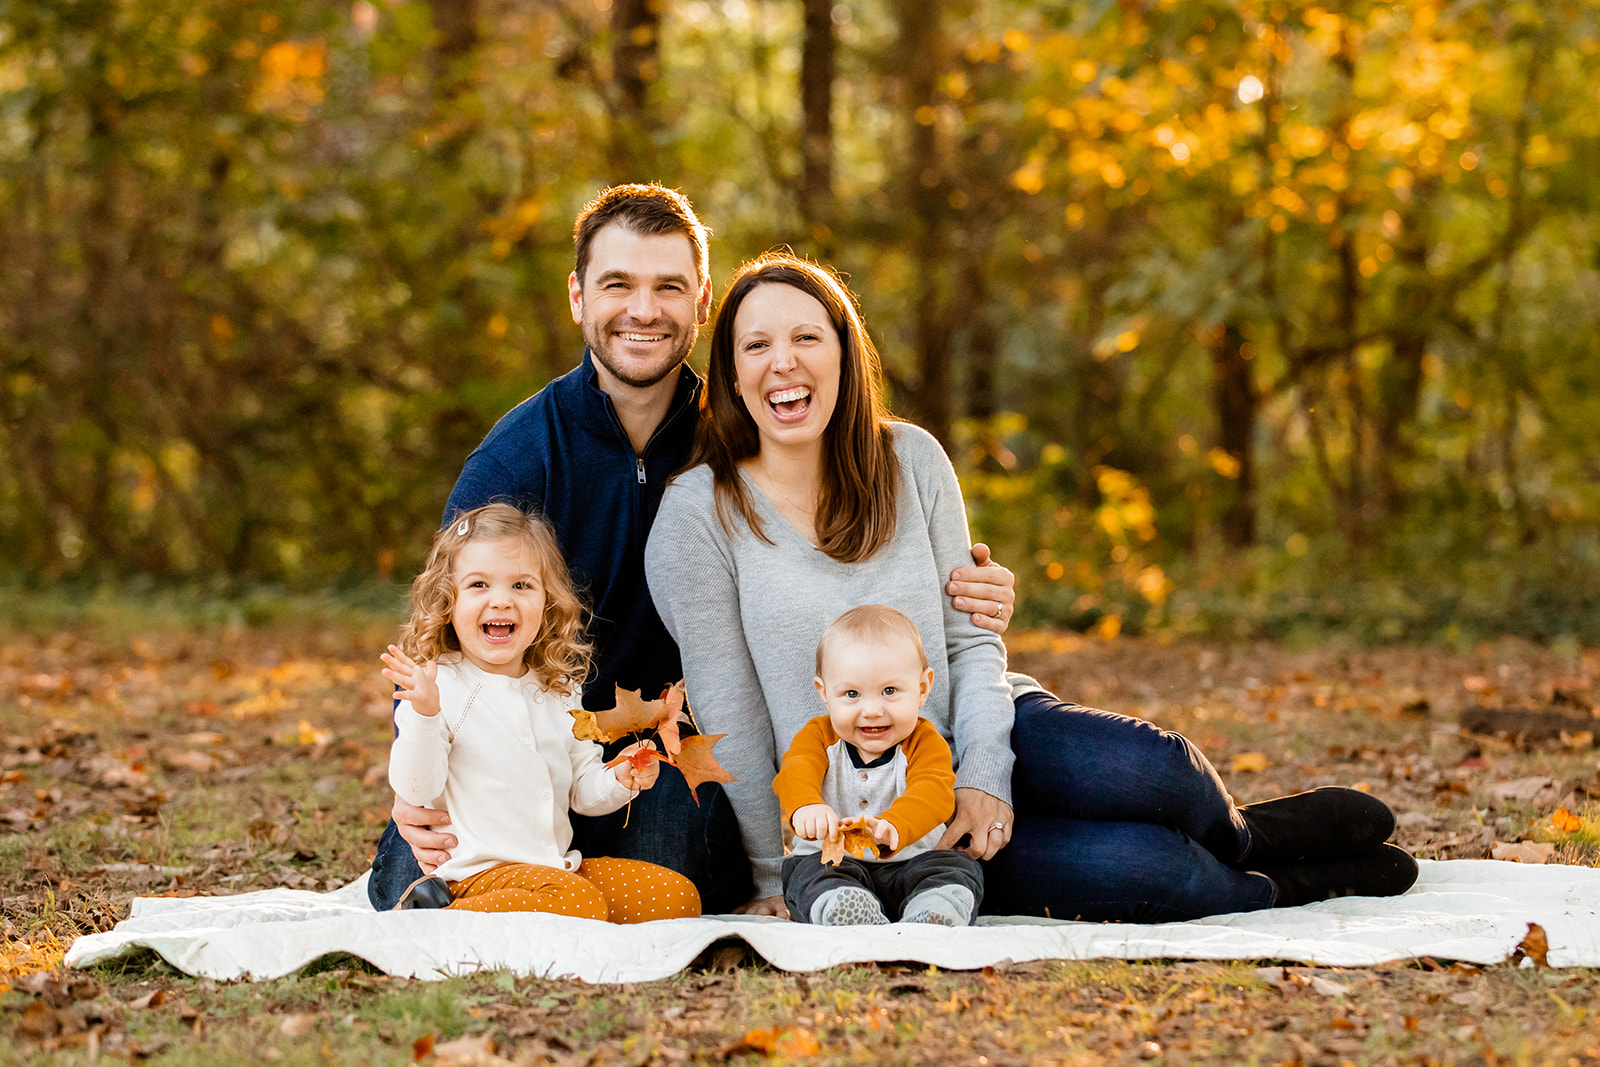 5 Family Photo Mistakes You Didnt Know You Were Making - Image Property of www.j-dphoto.com